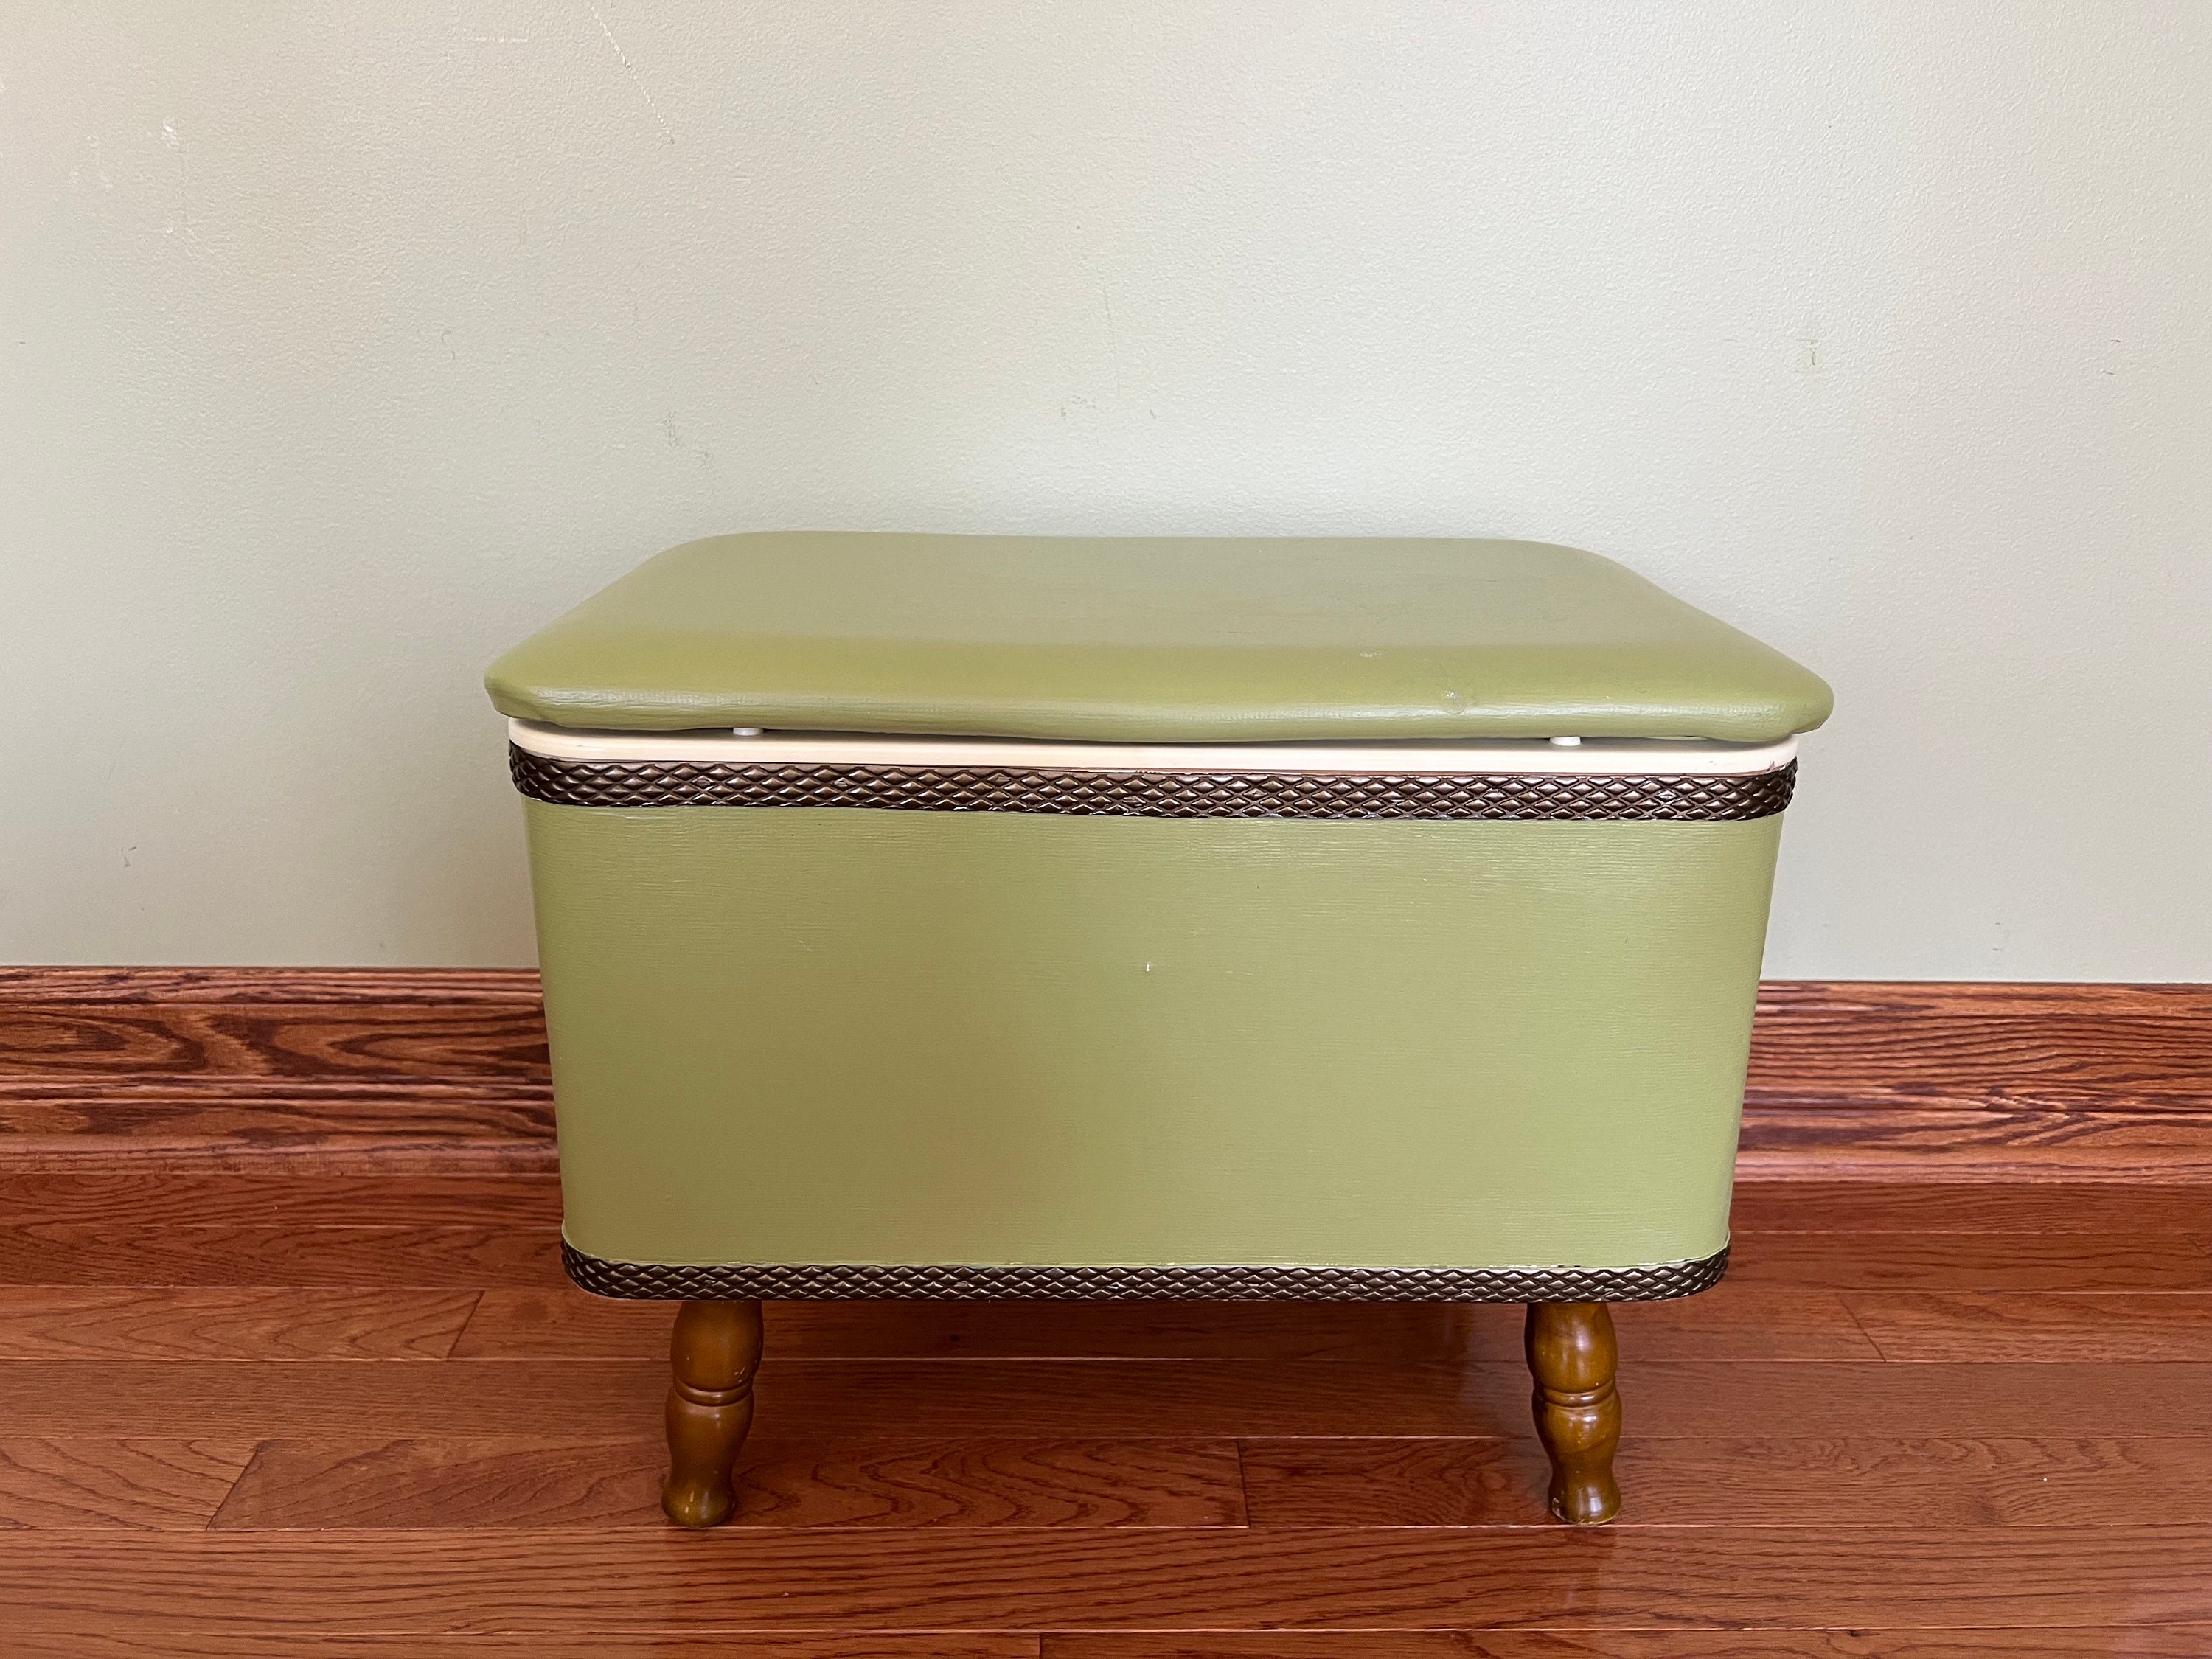 20 Vintage sewing boxes ideas  vintage sewing box, sewing box